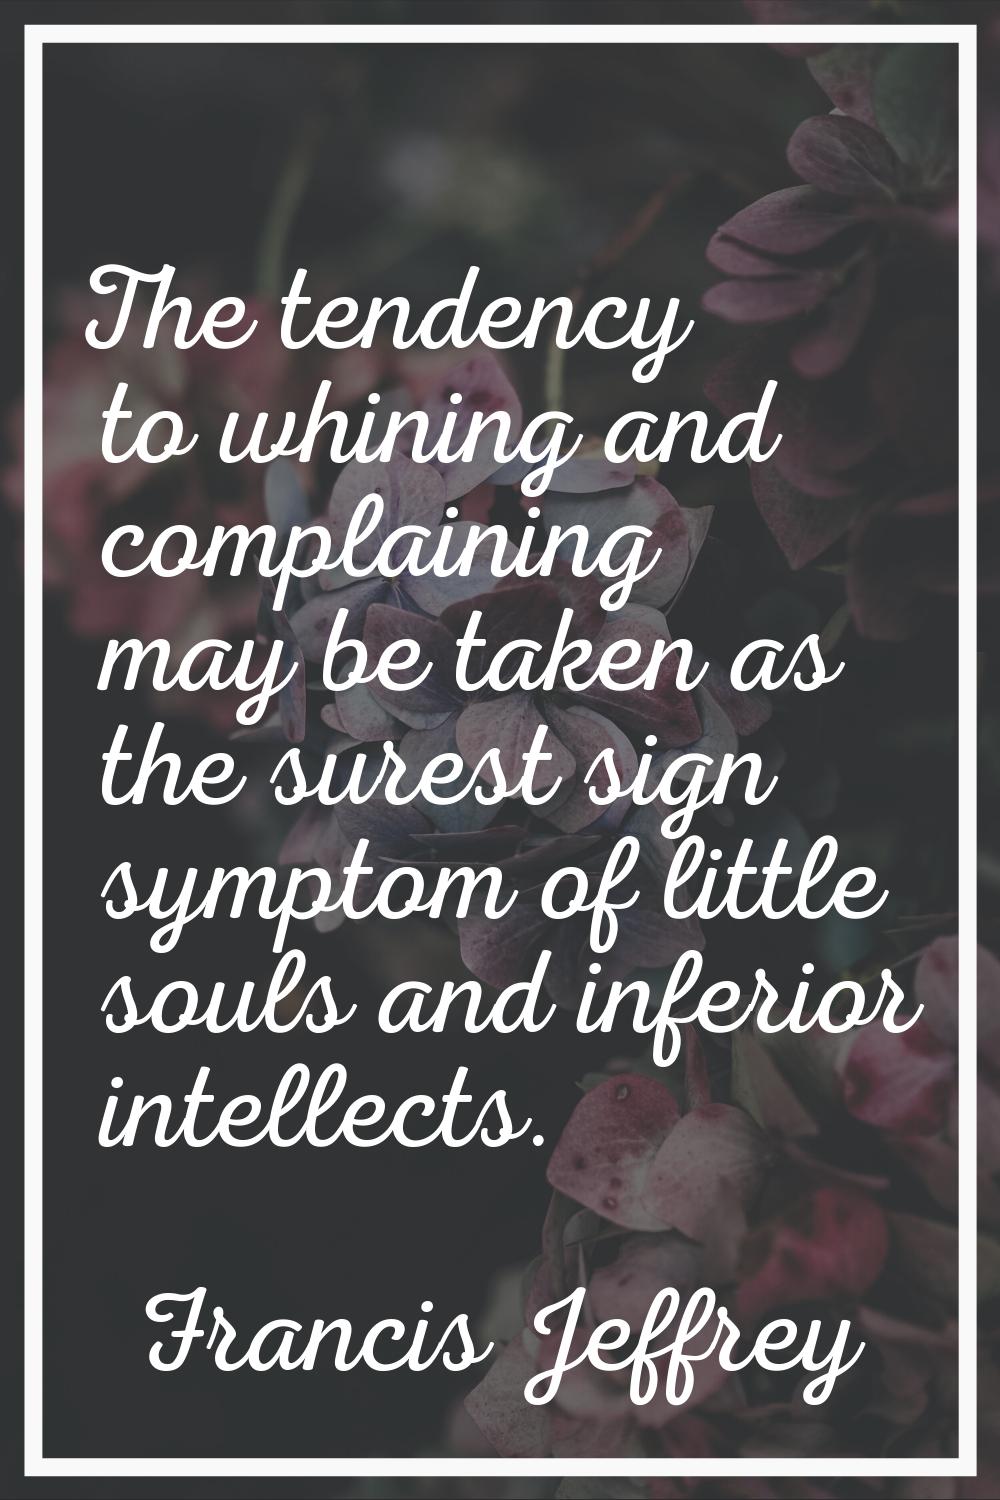 The tendency to whining and complaining may be taken as the surest sign symptom of little souls and